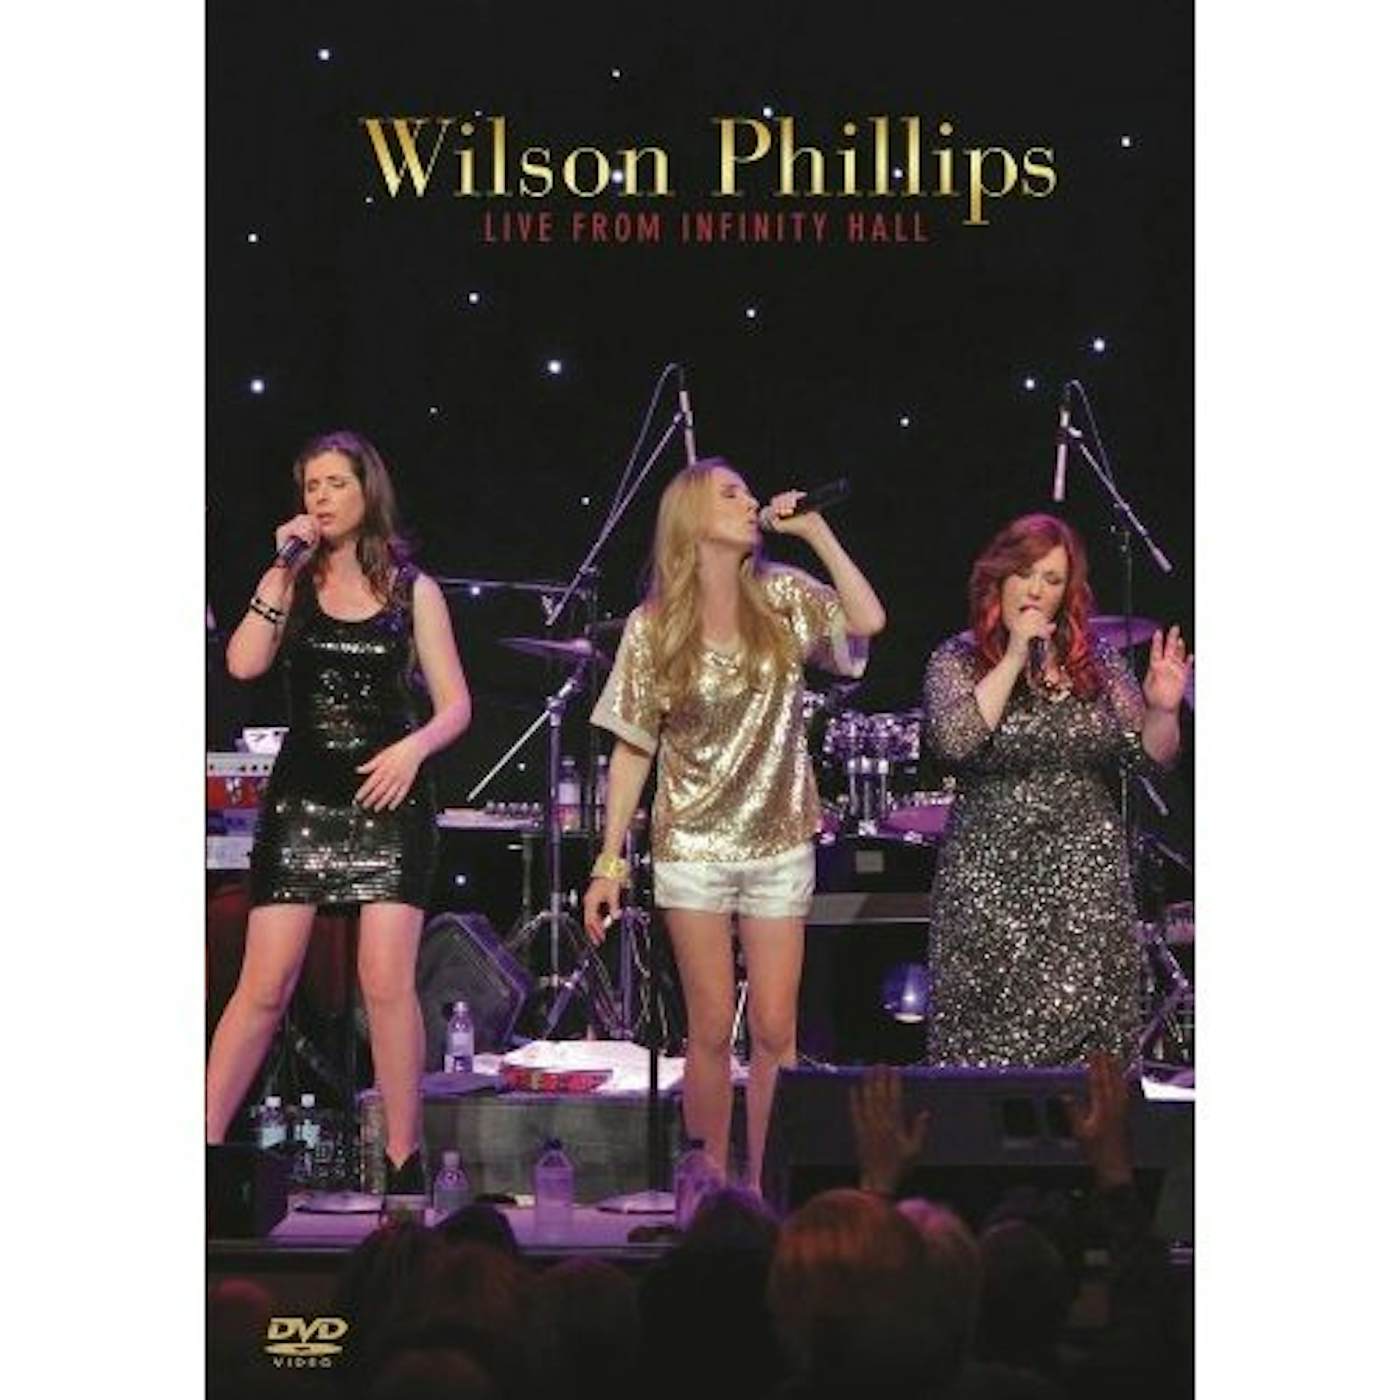 WILSON PHILLIPS LIVE FROM INFINITY HALL DVD